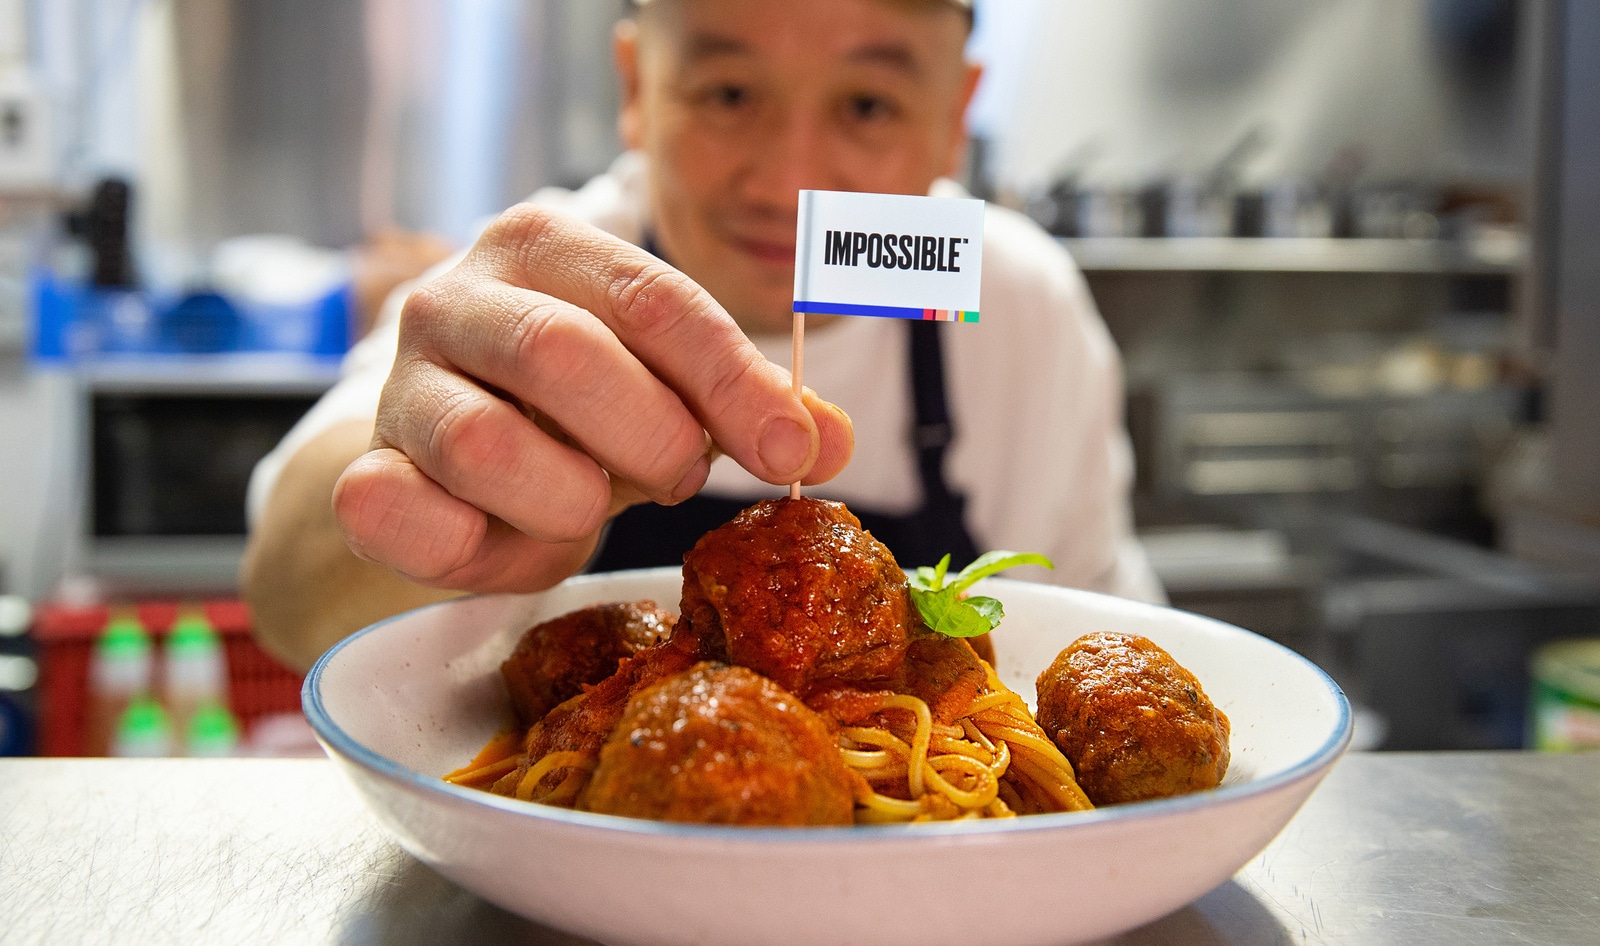 Impossible Foods Has Now Raised Nearly $2 Billion to Make Animal Foods Obsolete by 2035